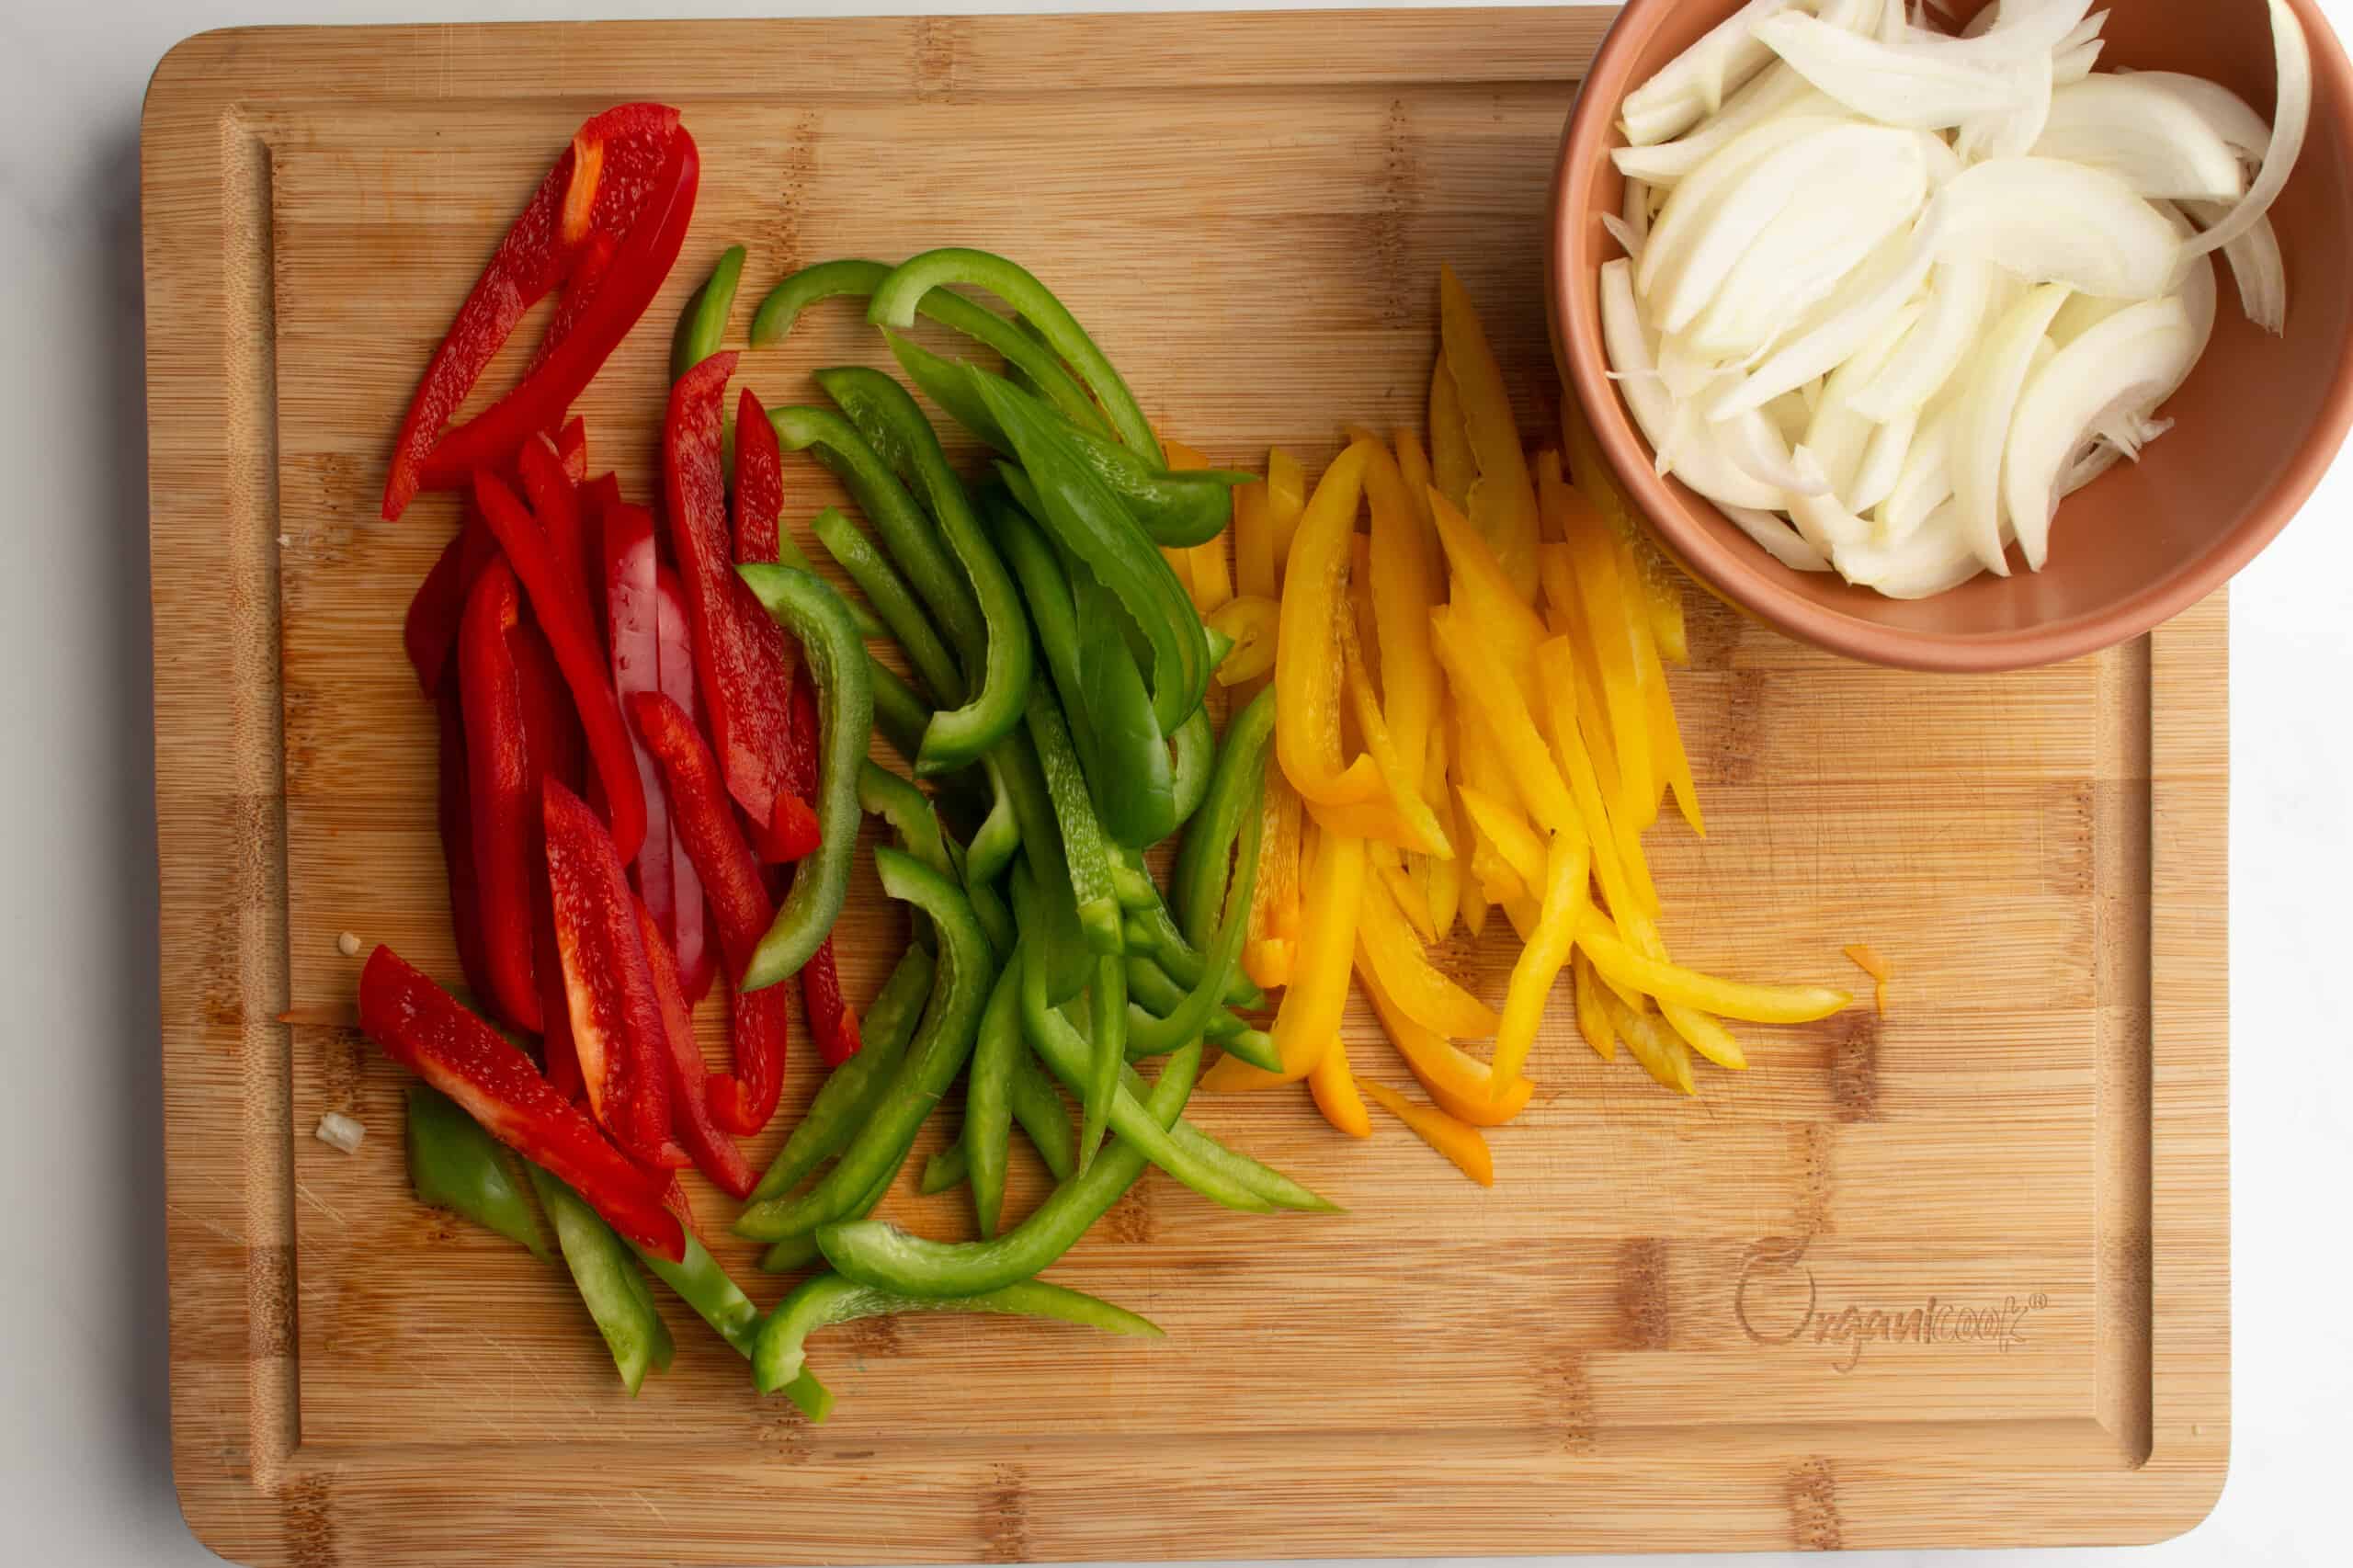 Chopped red, green and yellow peppers on a wooden chopping board with sliced white onion in a bowl.